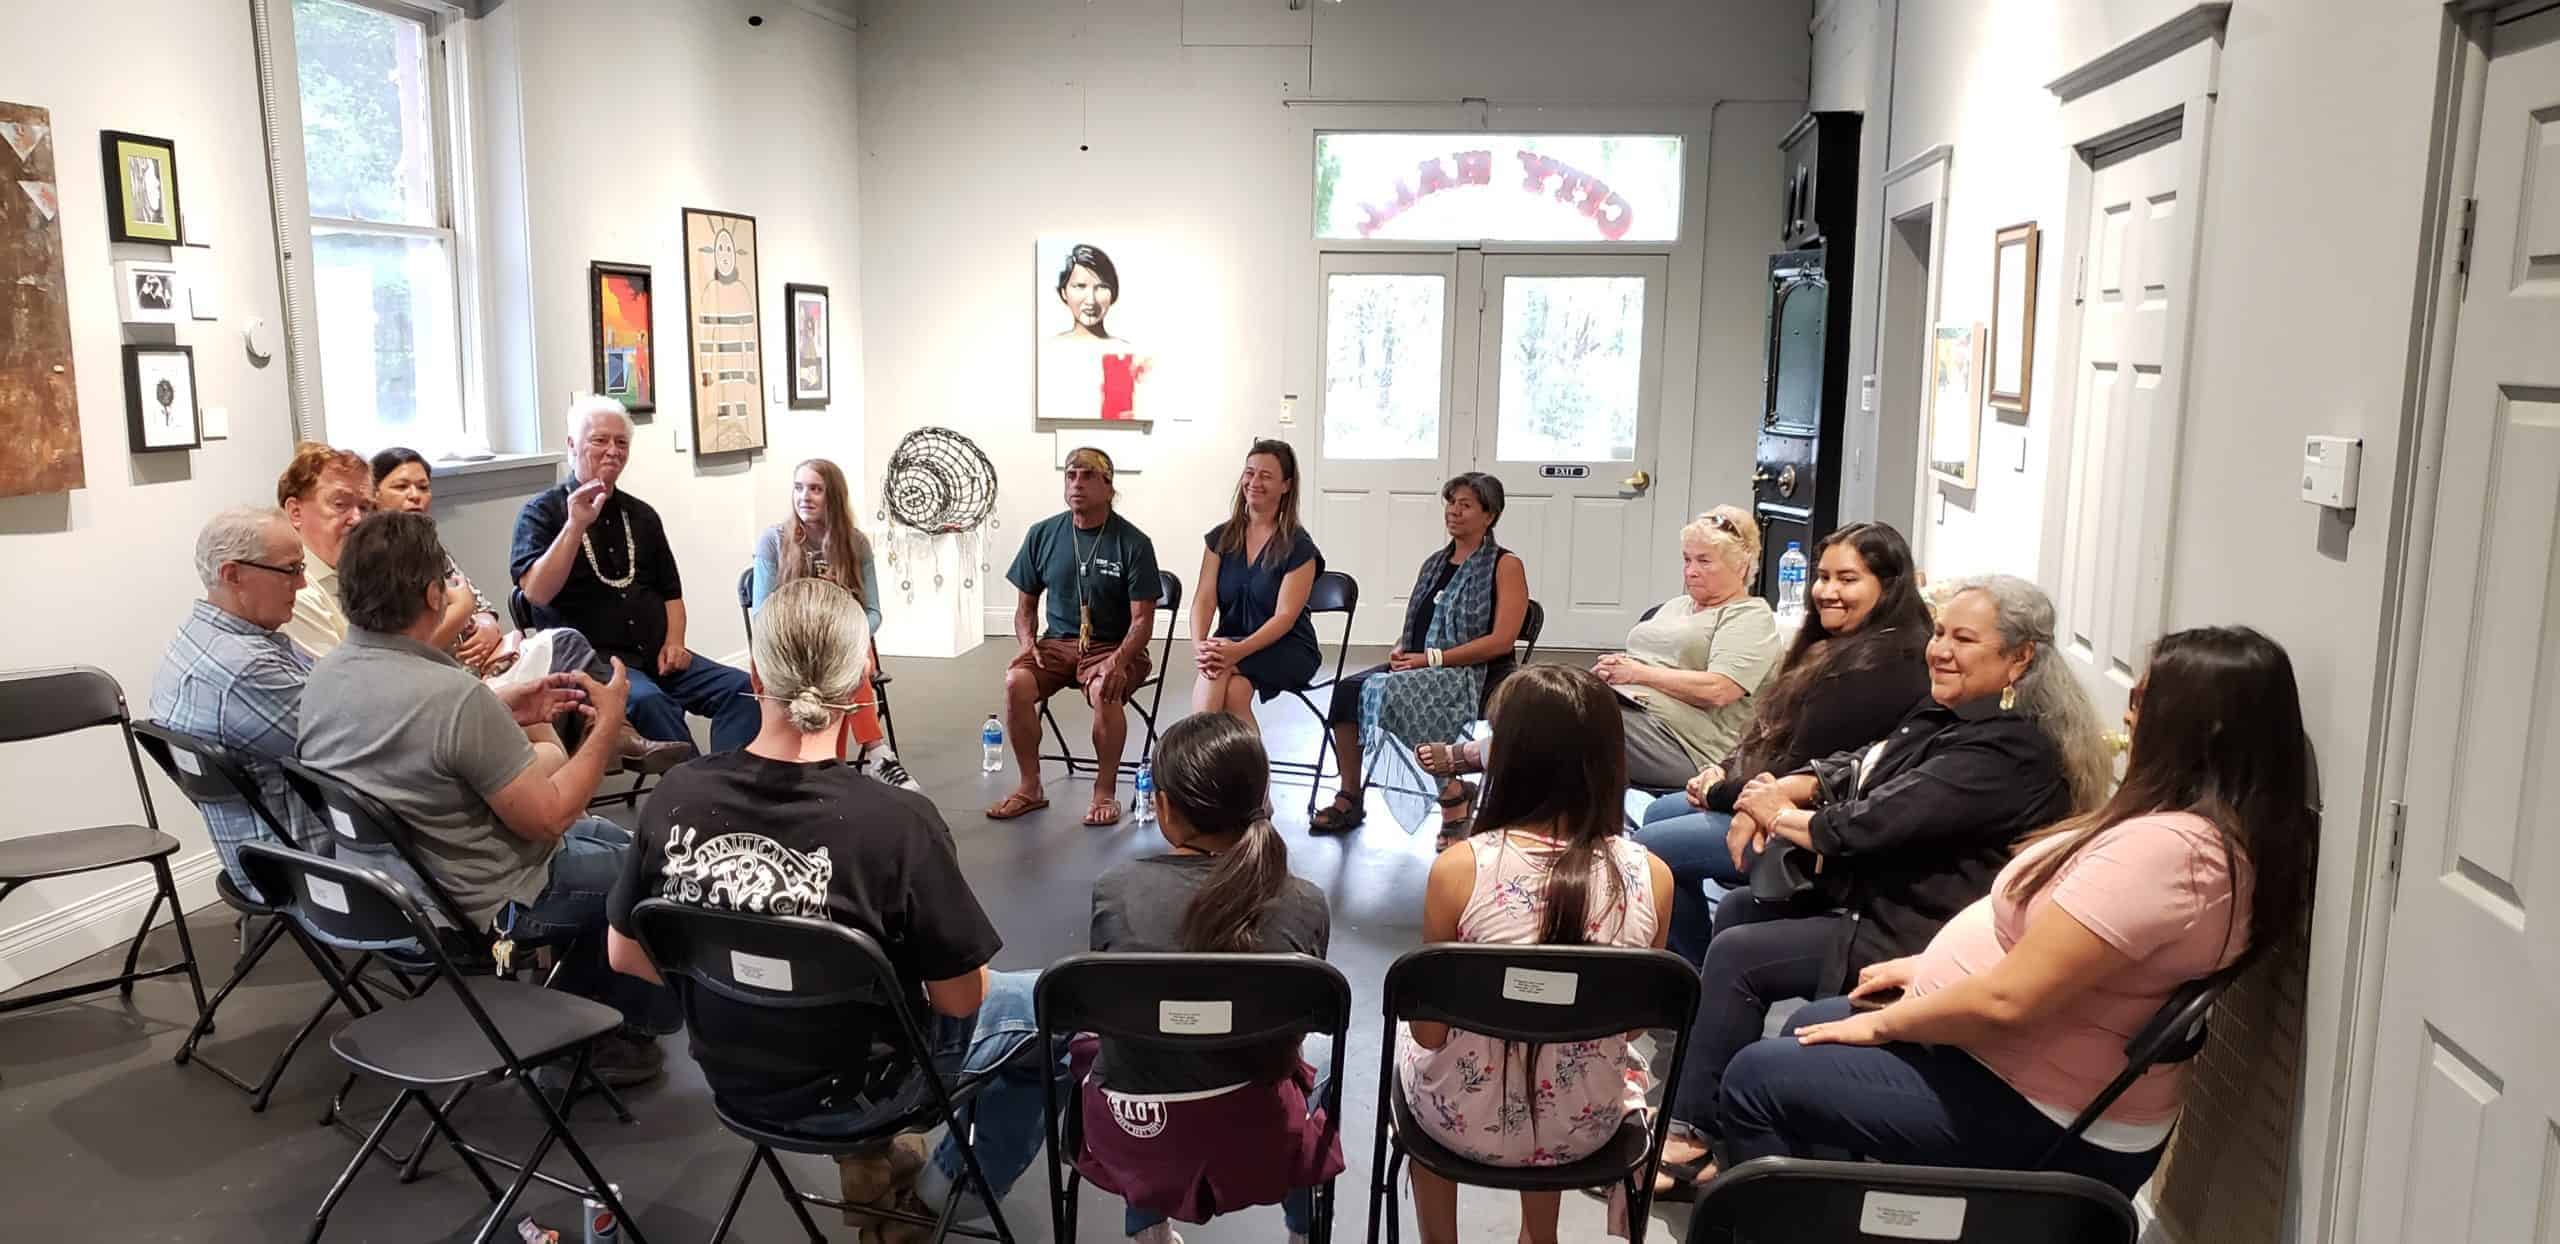 "Connected" Artist talk in the round